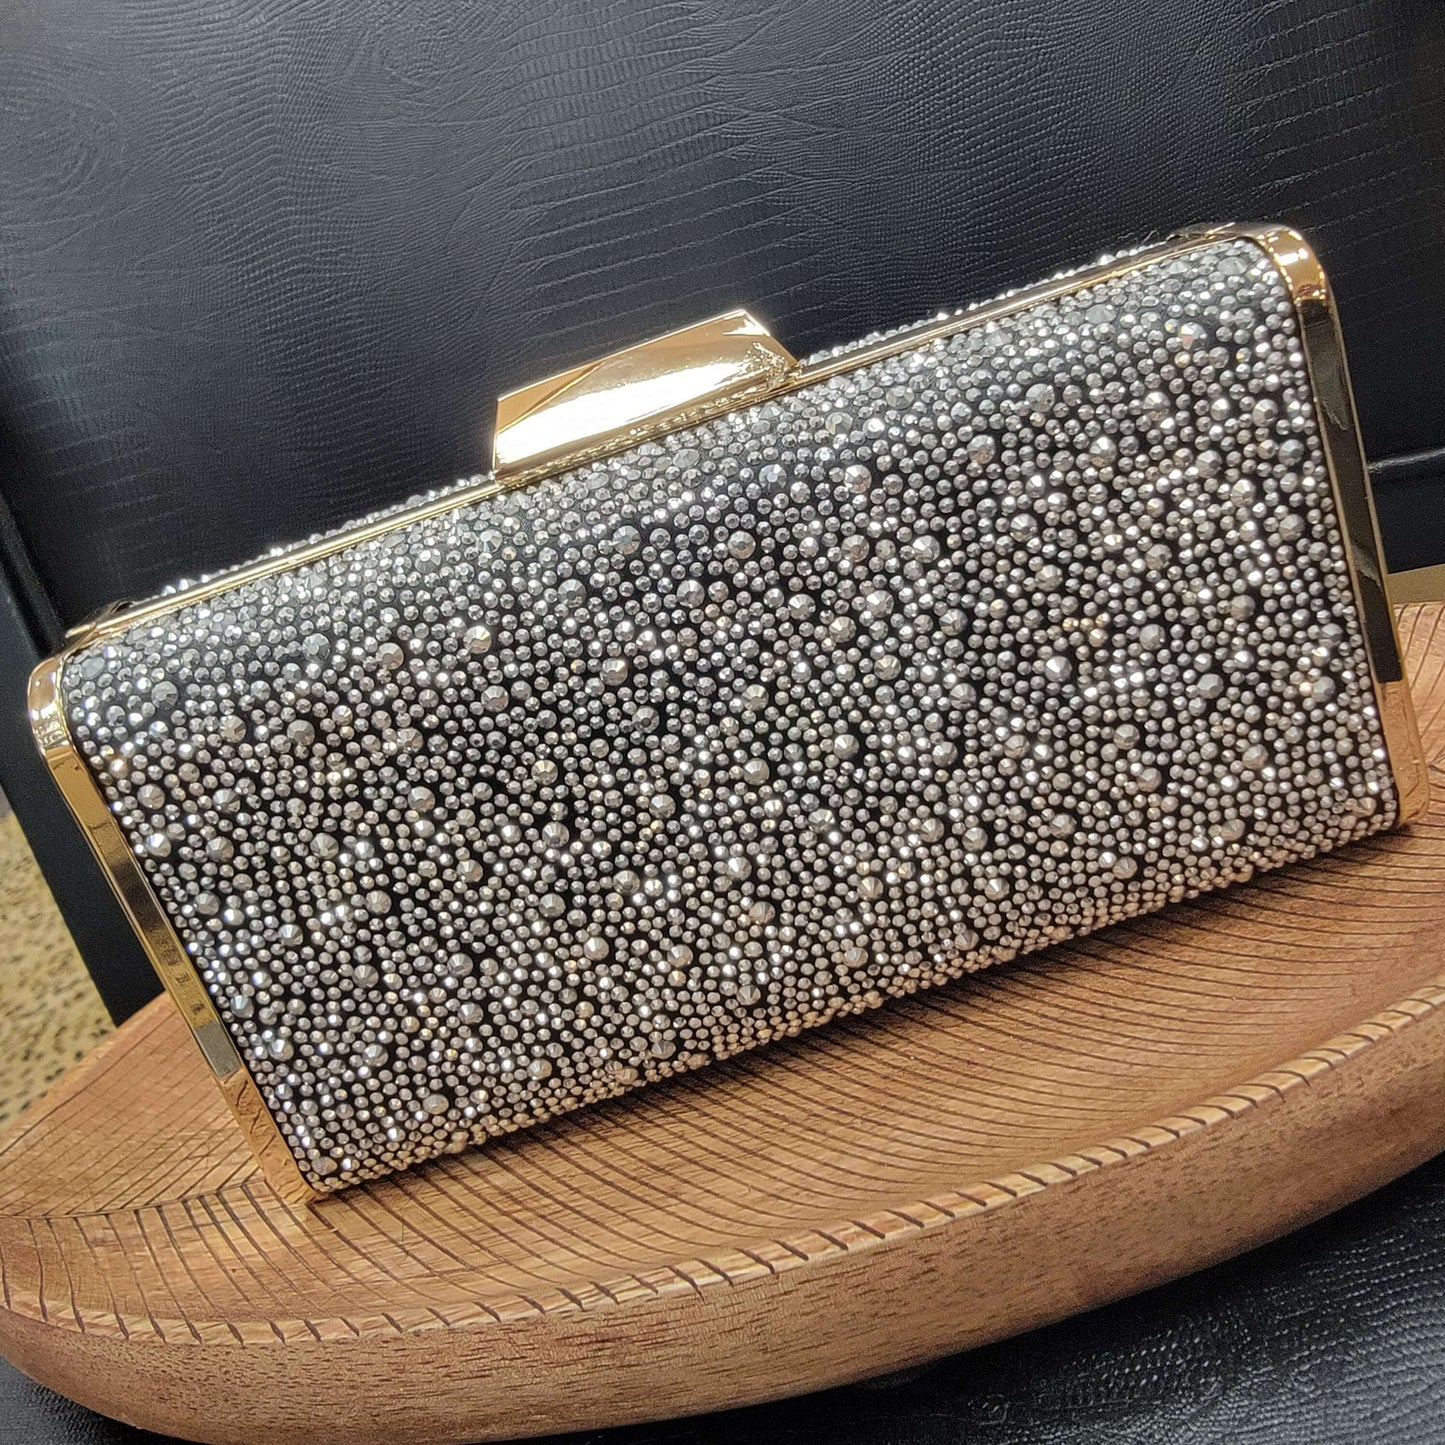 URBAN EXPRESSIONS - Madelyn Evening Bag - Black & Gold, ACCESSORIES, Urban Expression, Plum Bottom